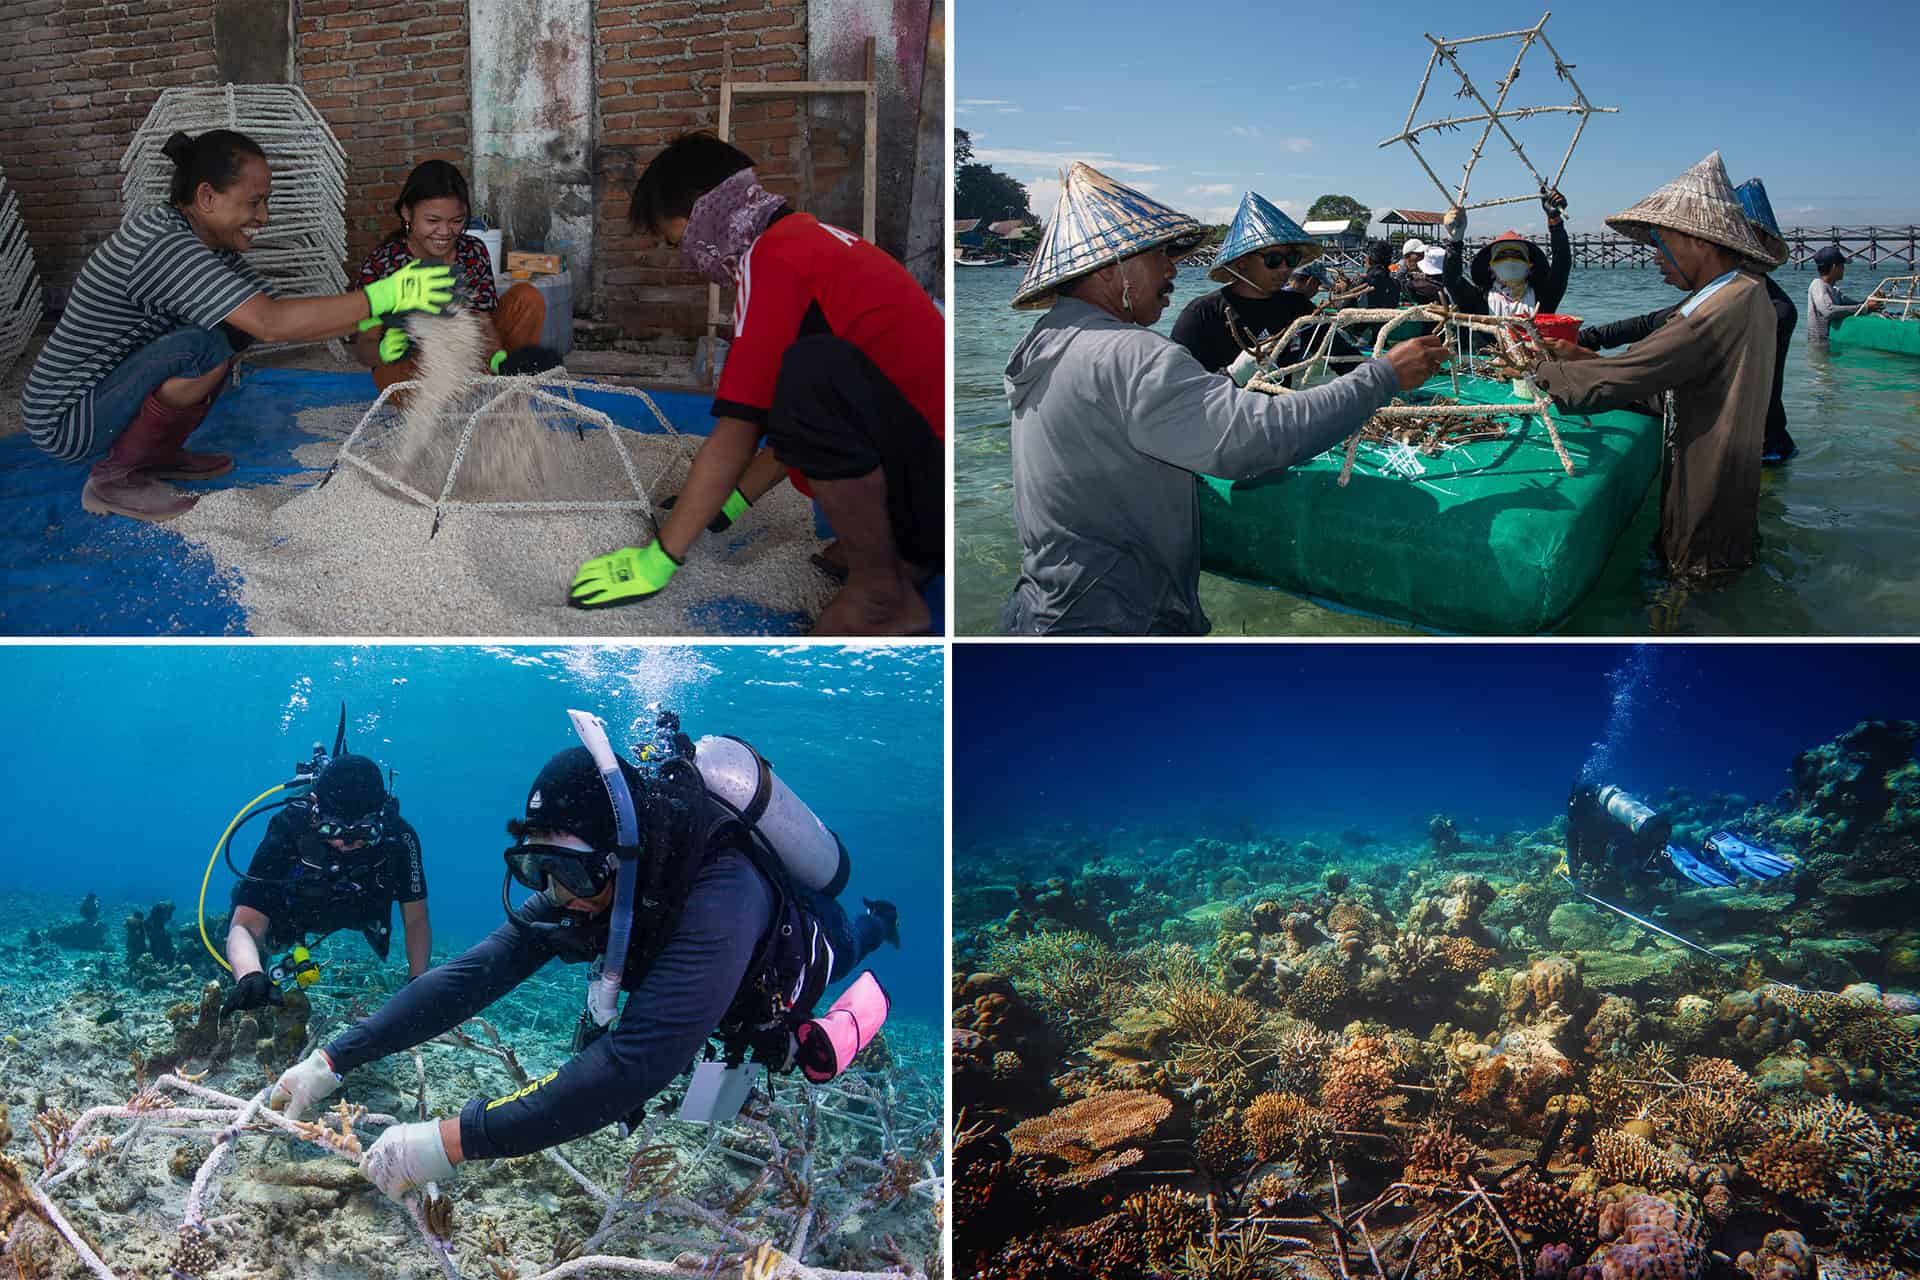 Construction and installation of Reef Stars. - New Method Fully Recovers Coral Reefs Destroyed By Blast Fishing